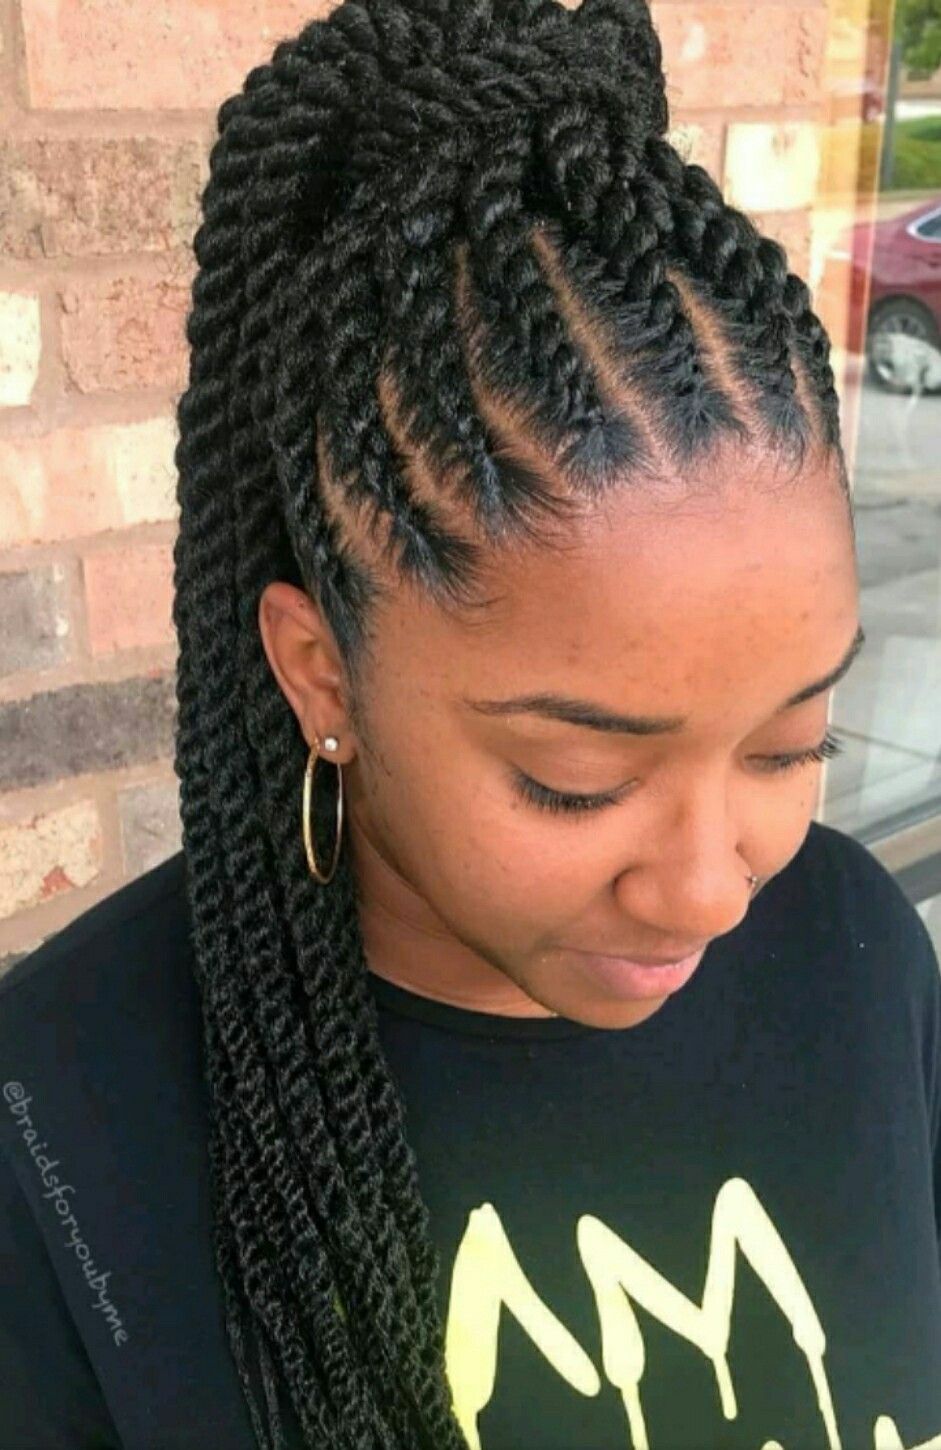 Black Women Hairstyles Ideas That You Can Make Yourself Beautiful With Small Touches 003